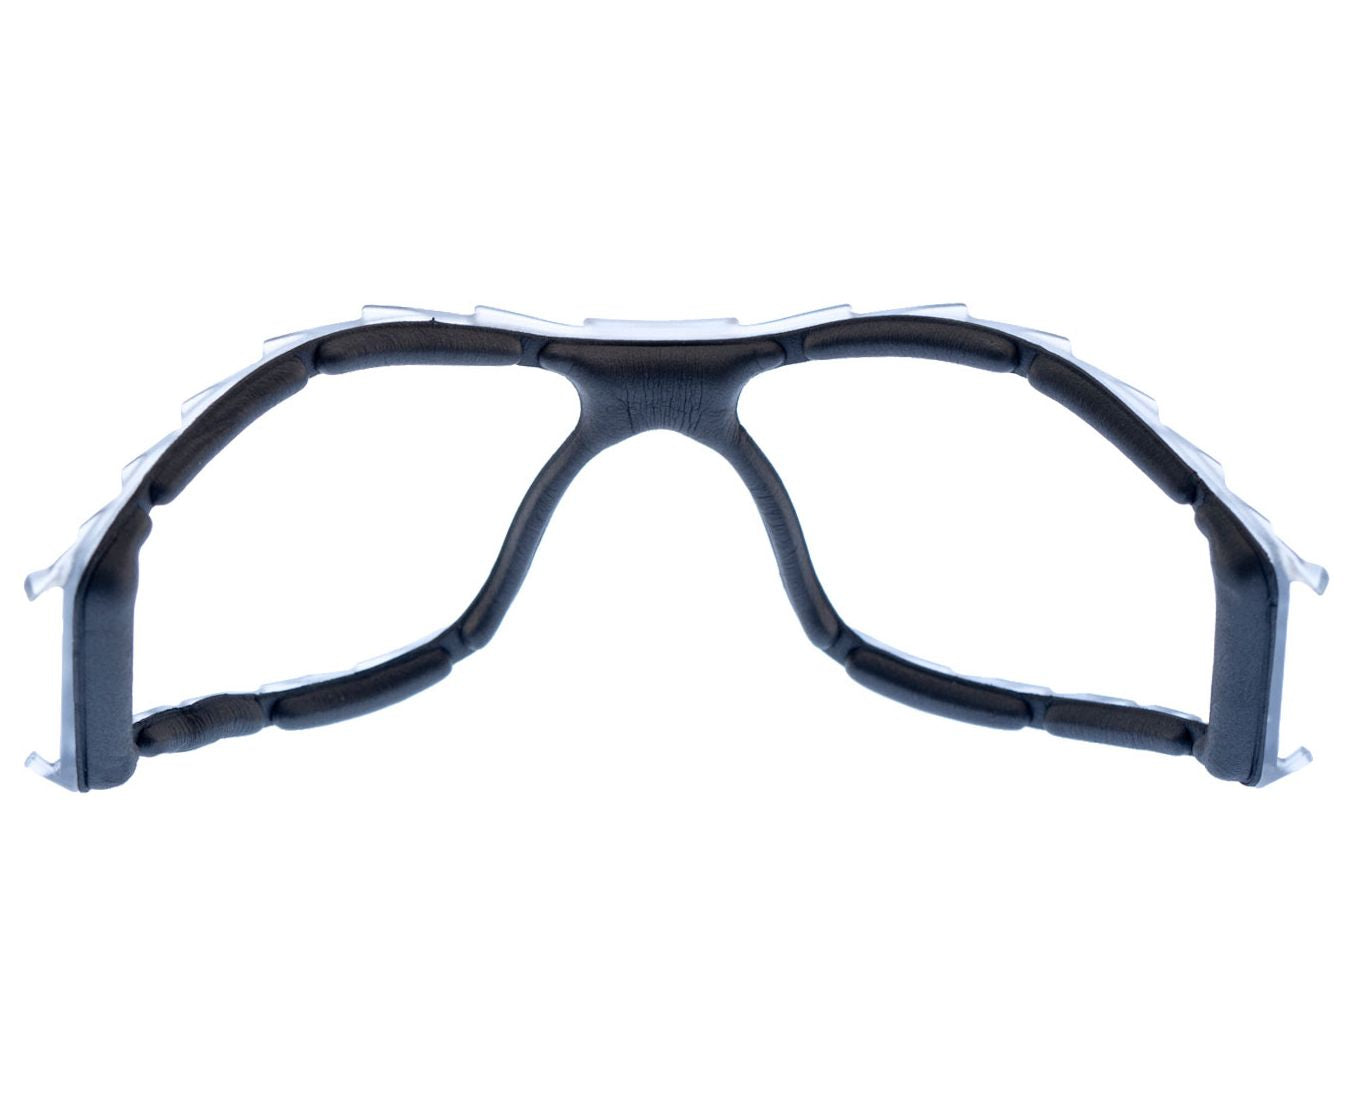 VISIONSAFE 125 SEAL SAFETY SPECTACLES - W/STRAP-POSITIVE SEAL